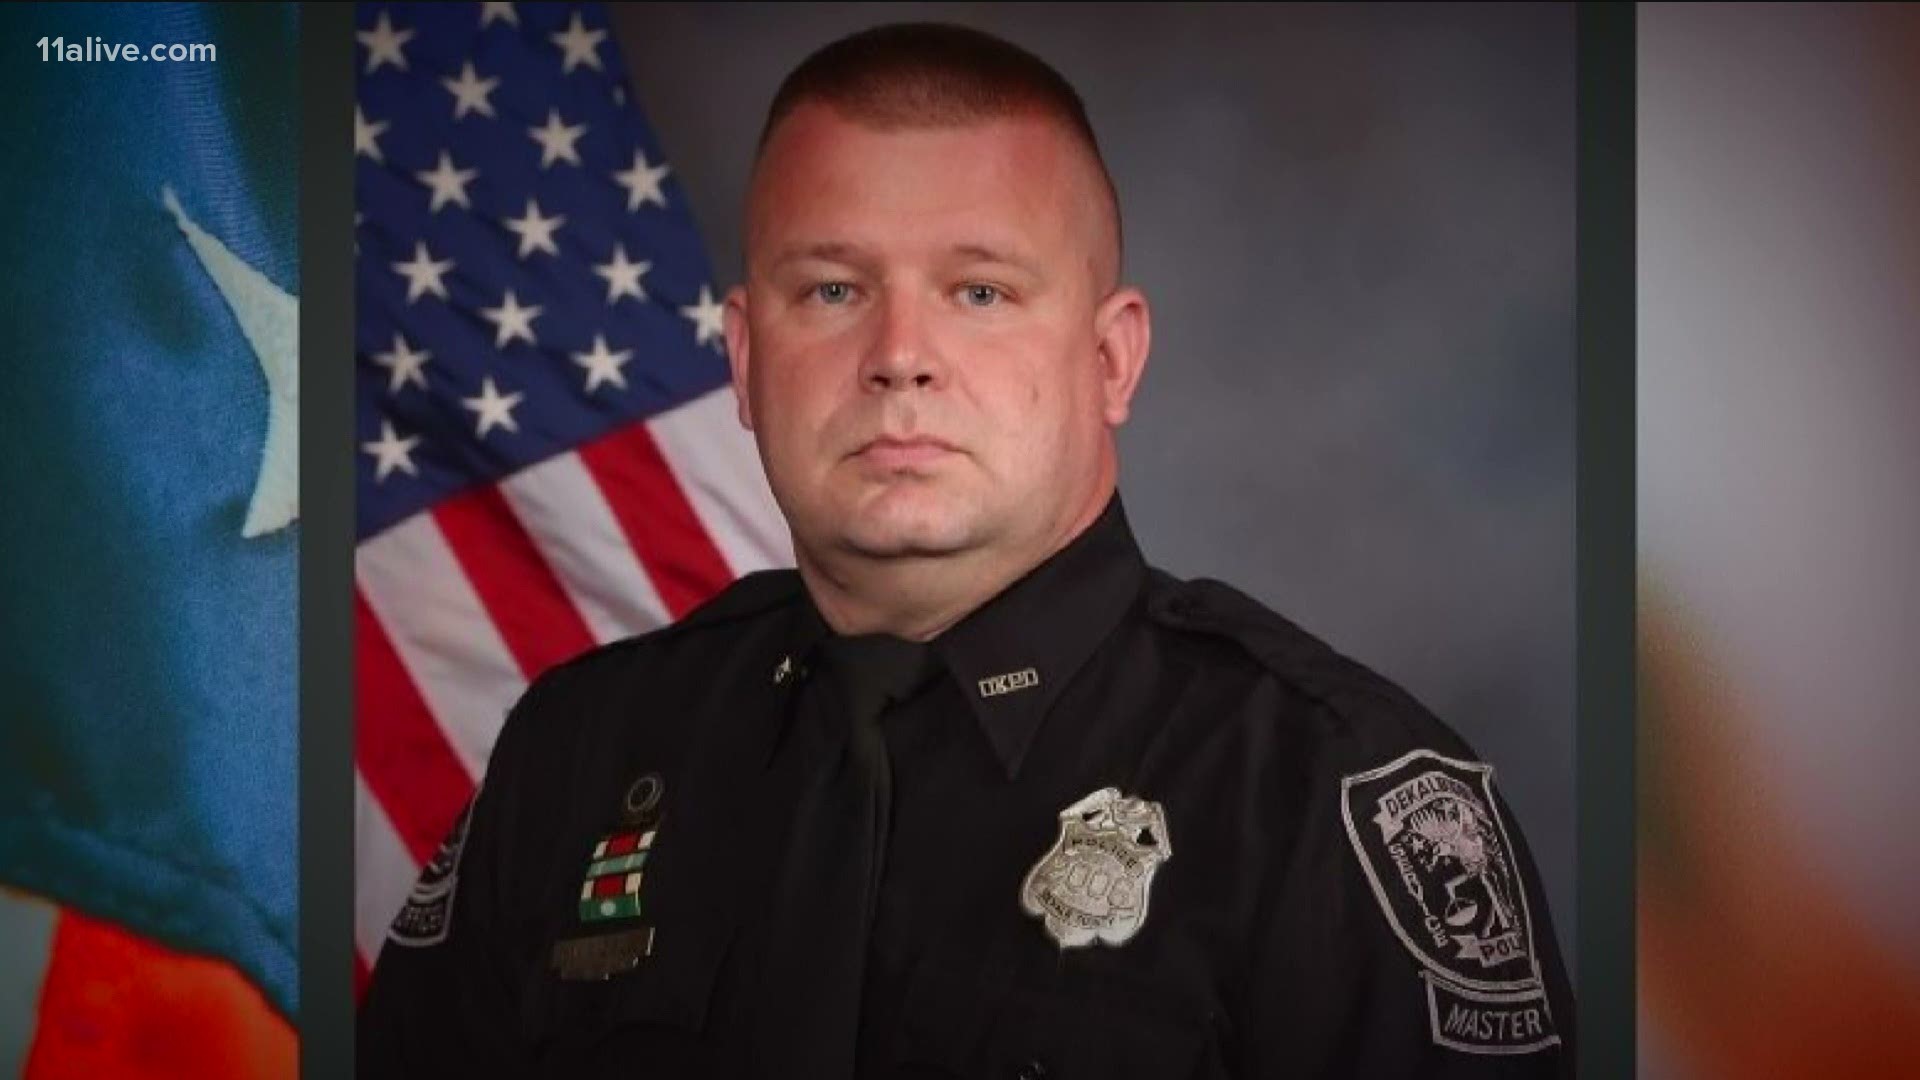 The officer was killed in the line of duty on Saturday morning.